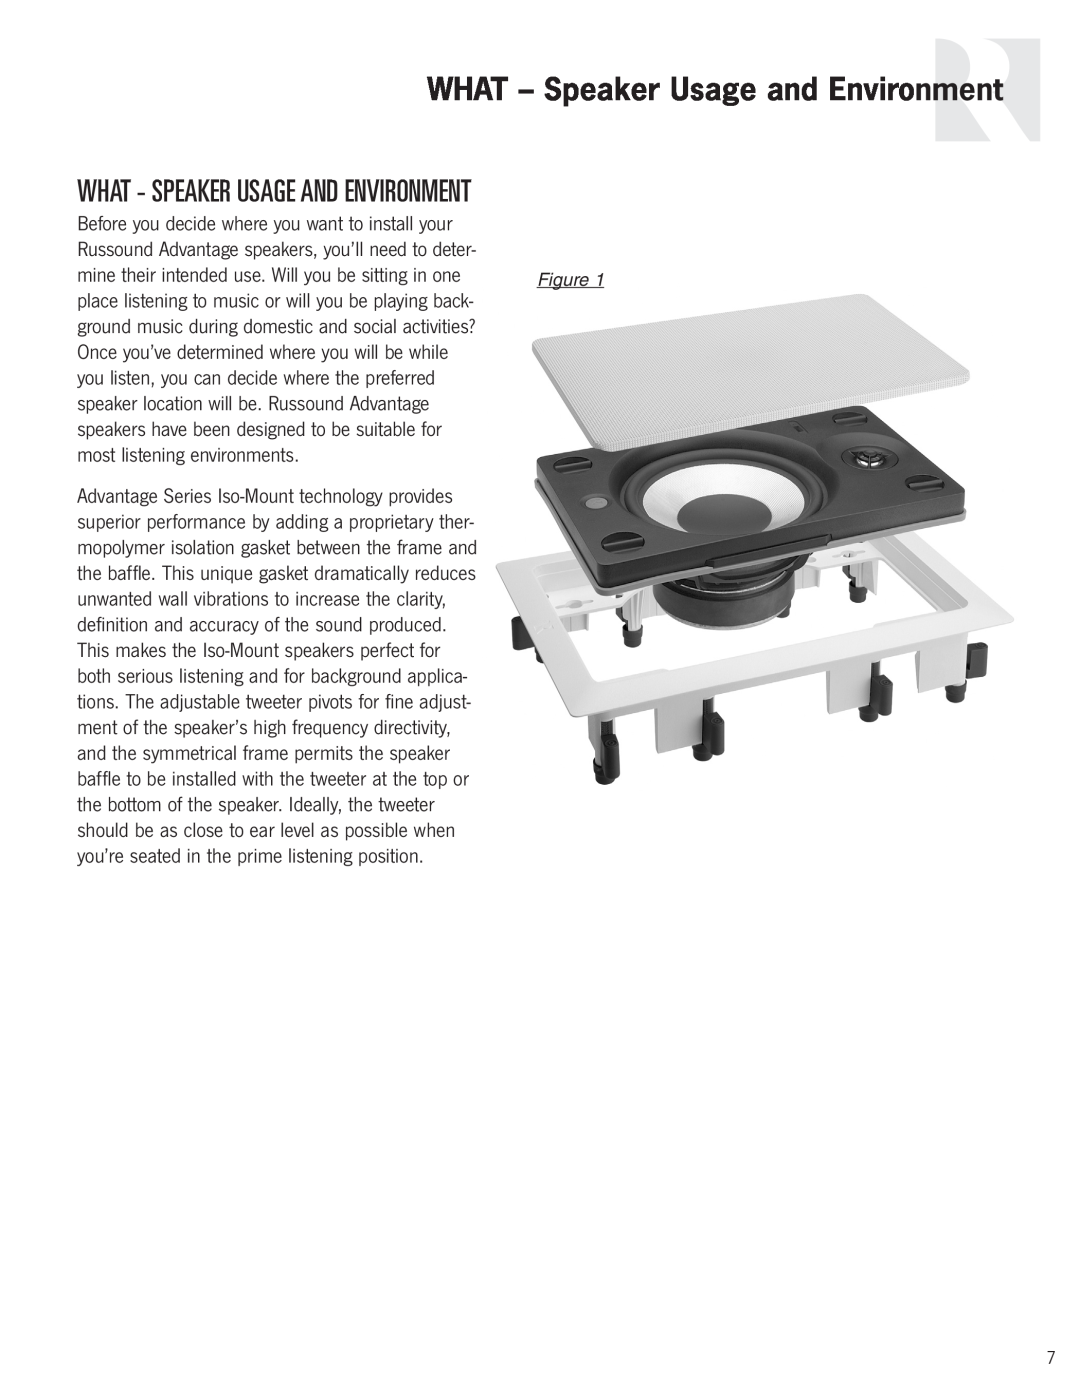 Russound Advantage Series owner manual WHAT - Speaker Usage and Environment, What - Speaker Usage And Environment 